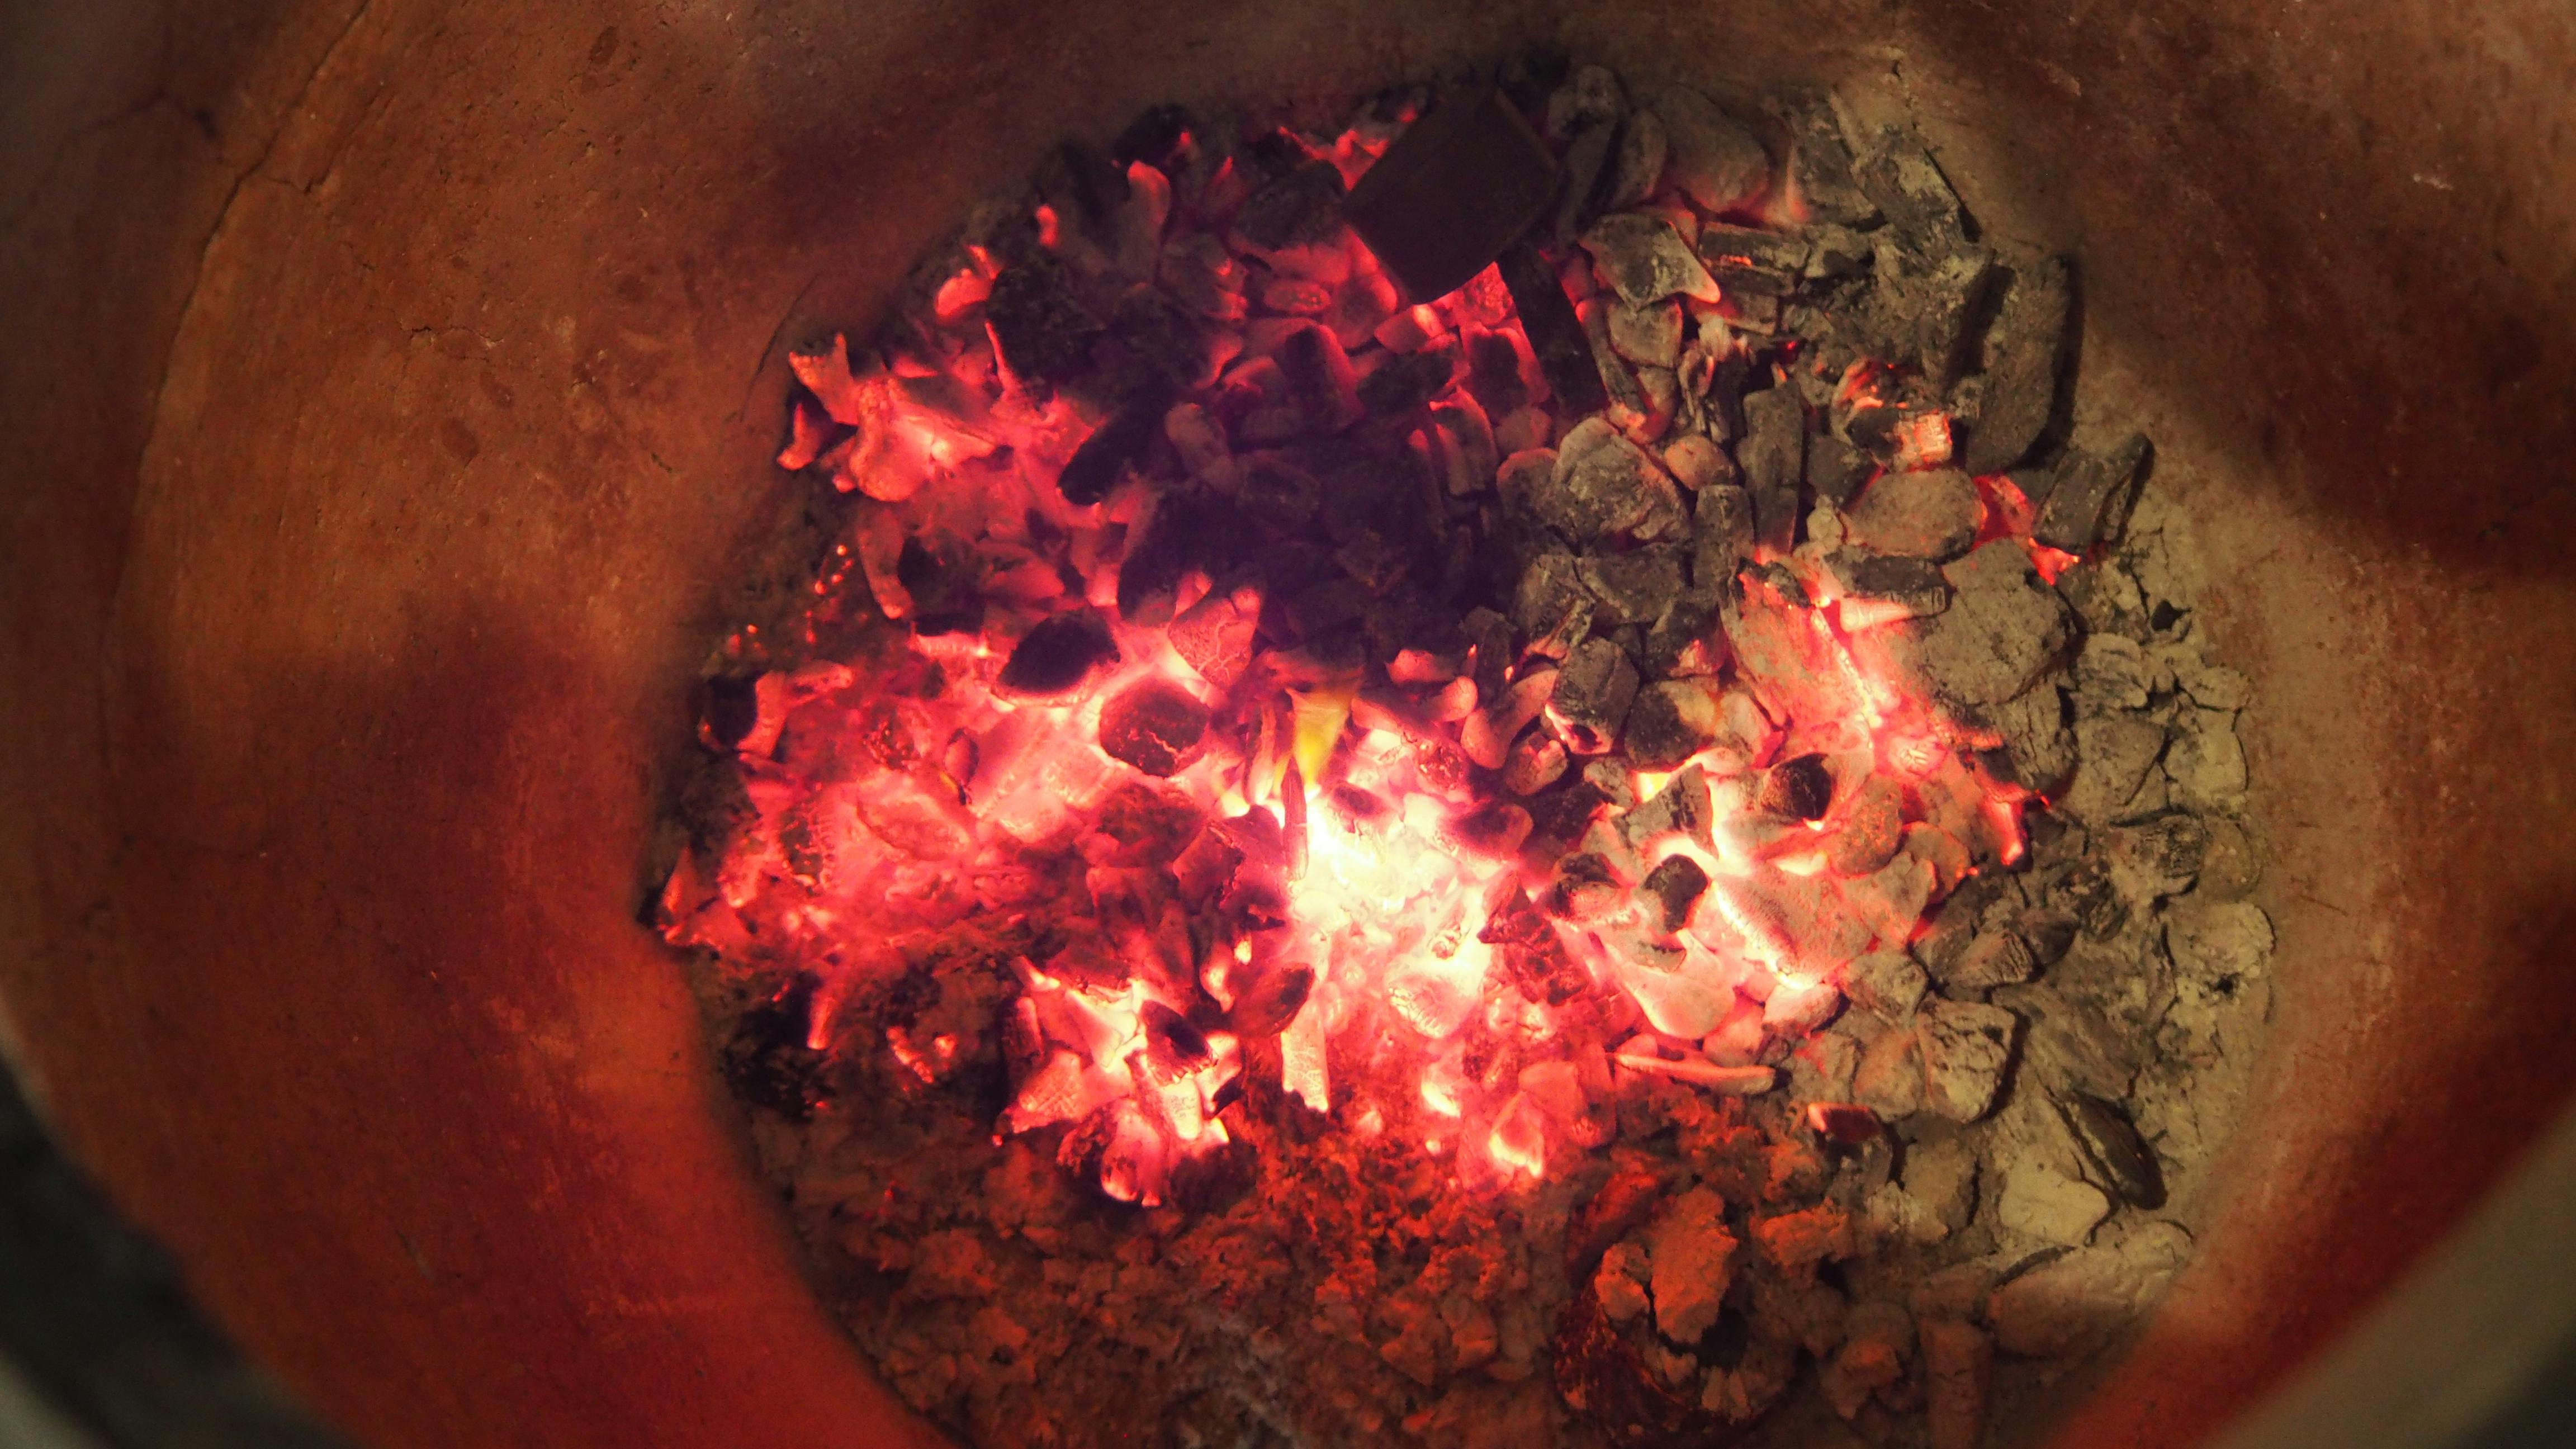 Free stock photo of clay oven, fire, indian oven